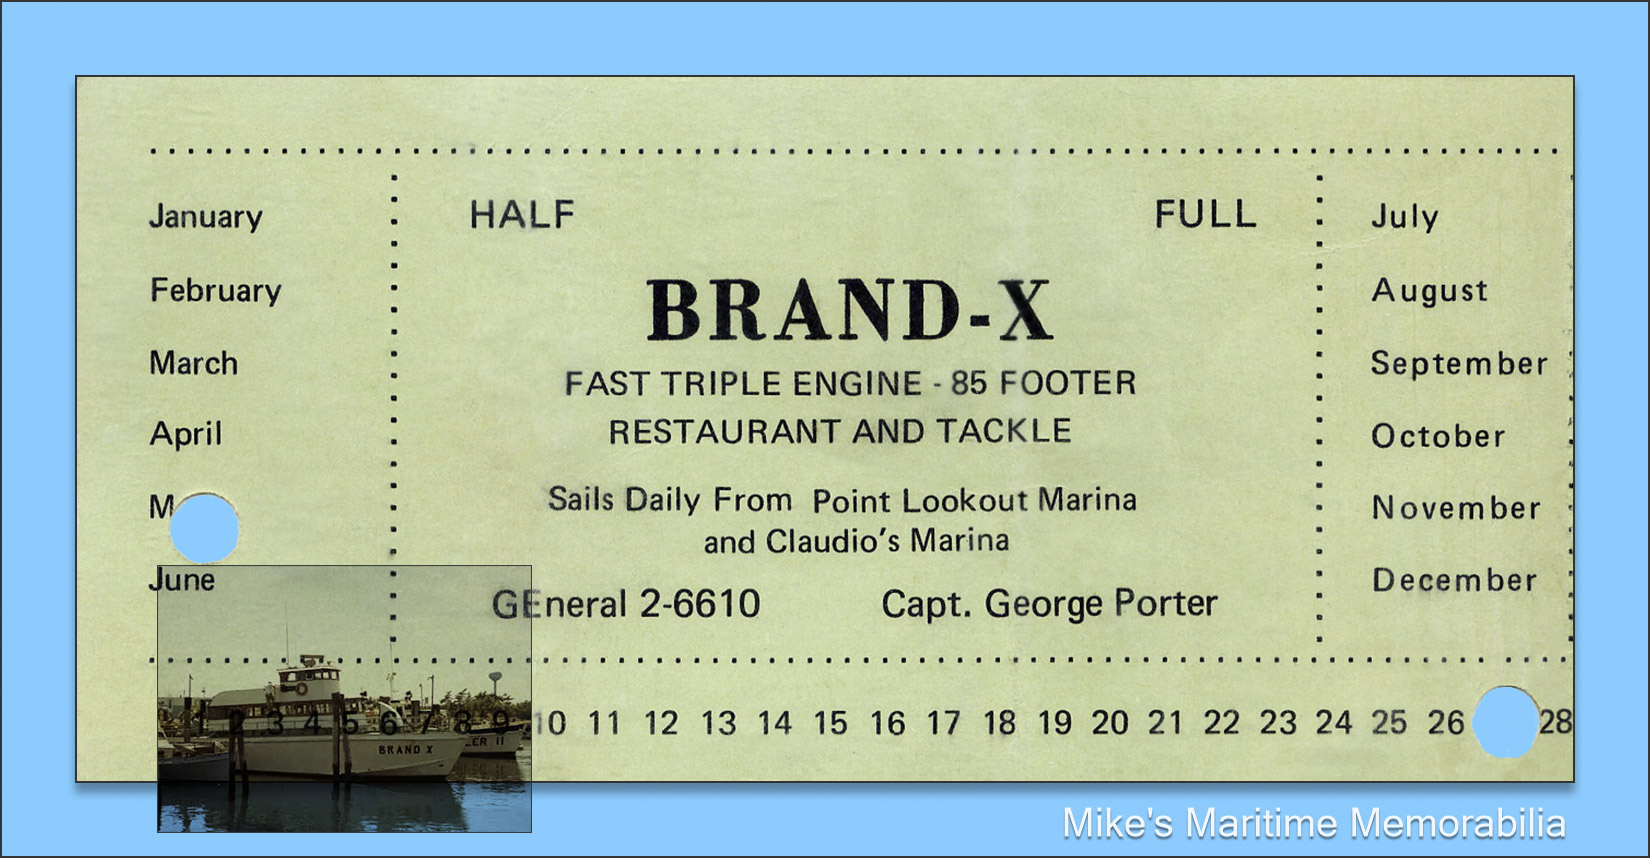 BRAND X Fare Ticket, Point Lookout, NY – 1977 Captain George Porter's "BRAND X" was built in 1944 by Higgins Industries at New Orleans, LA as the U.S. Navy Motor Torpedo Boat "PT-309". She was purchased as surplus in 1960 by Captain Ira "Sonny" Ether and converted to his party fishing boat "SHERRY ANN" from Sheepshead Bay, Brooklyn, NY. In 1969 she became Captain George Porter's "BRAND X" from Point Lookout, NY and later from Greenport, NY. She is now fully restored as the "PT-309" and on display at the Nimitz Museum of the Pacific War in Fredericksburg, TX.